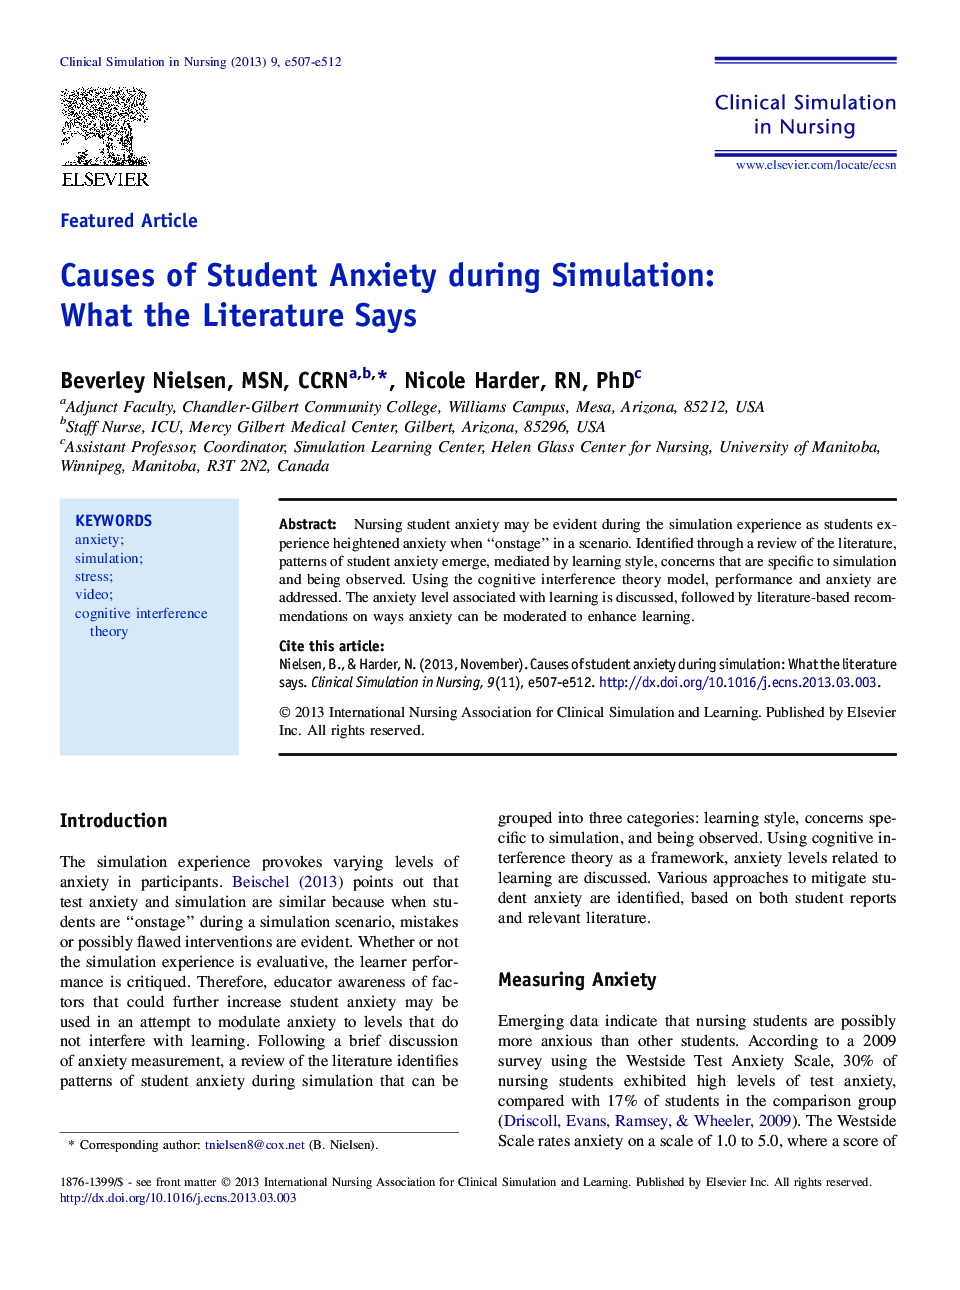 Causes of Student Anxiety during Simulation: What the Literature Says